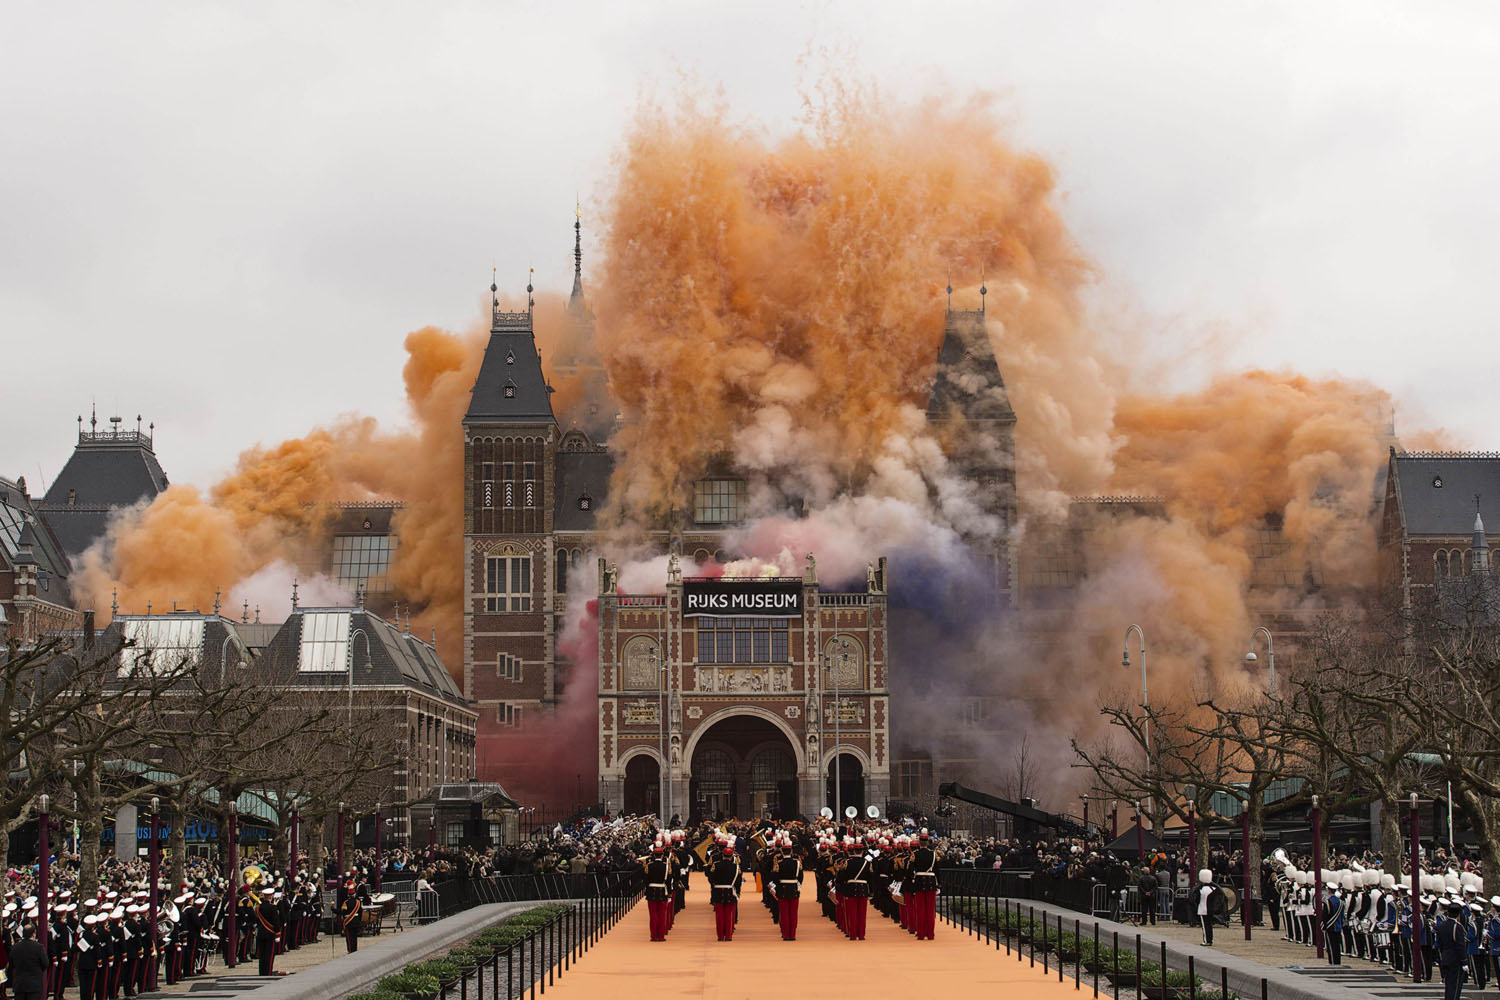 April 13, 2013. Queen Beatrix of the Netherlands (not visible) ignites fireworks at the Rijksmuseum in Amsterdam. Thousands of people gathered outside Amsterdam's Rijksmuseum, home to Rembrandt van Rijn's  The Night Watch  and other Dutch masterpieces, as Queen Beatrix declared the national museum open on Saturday after a decade-long renovation.